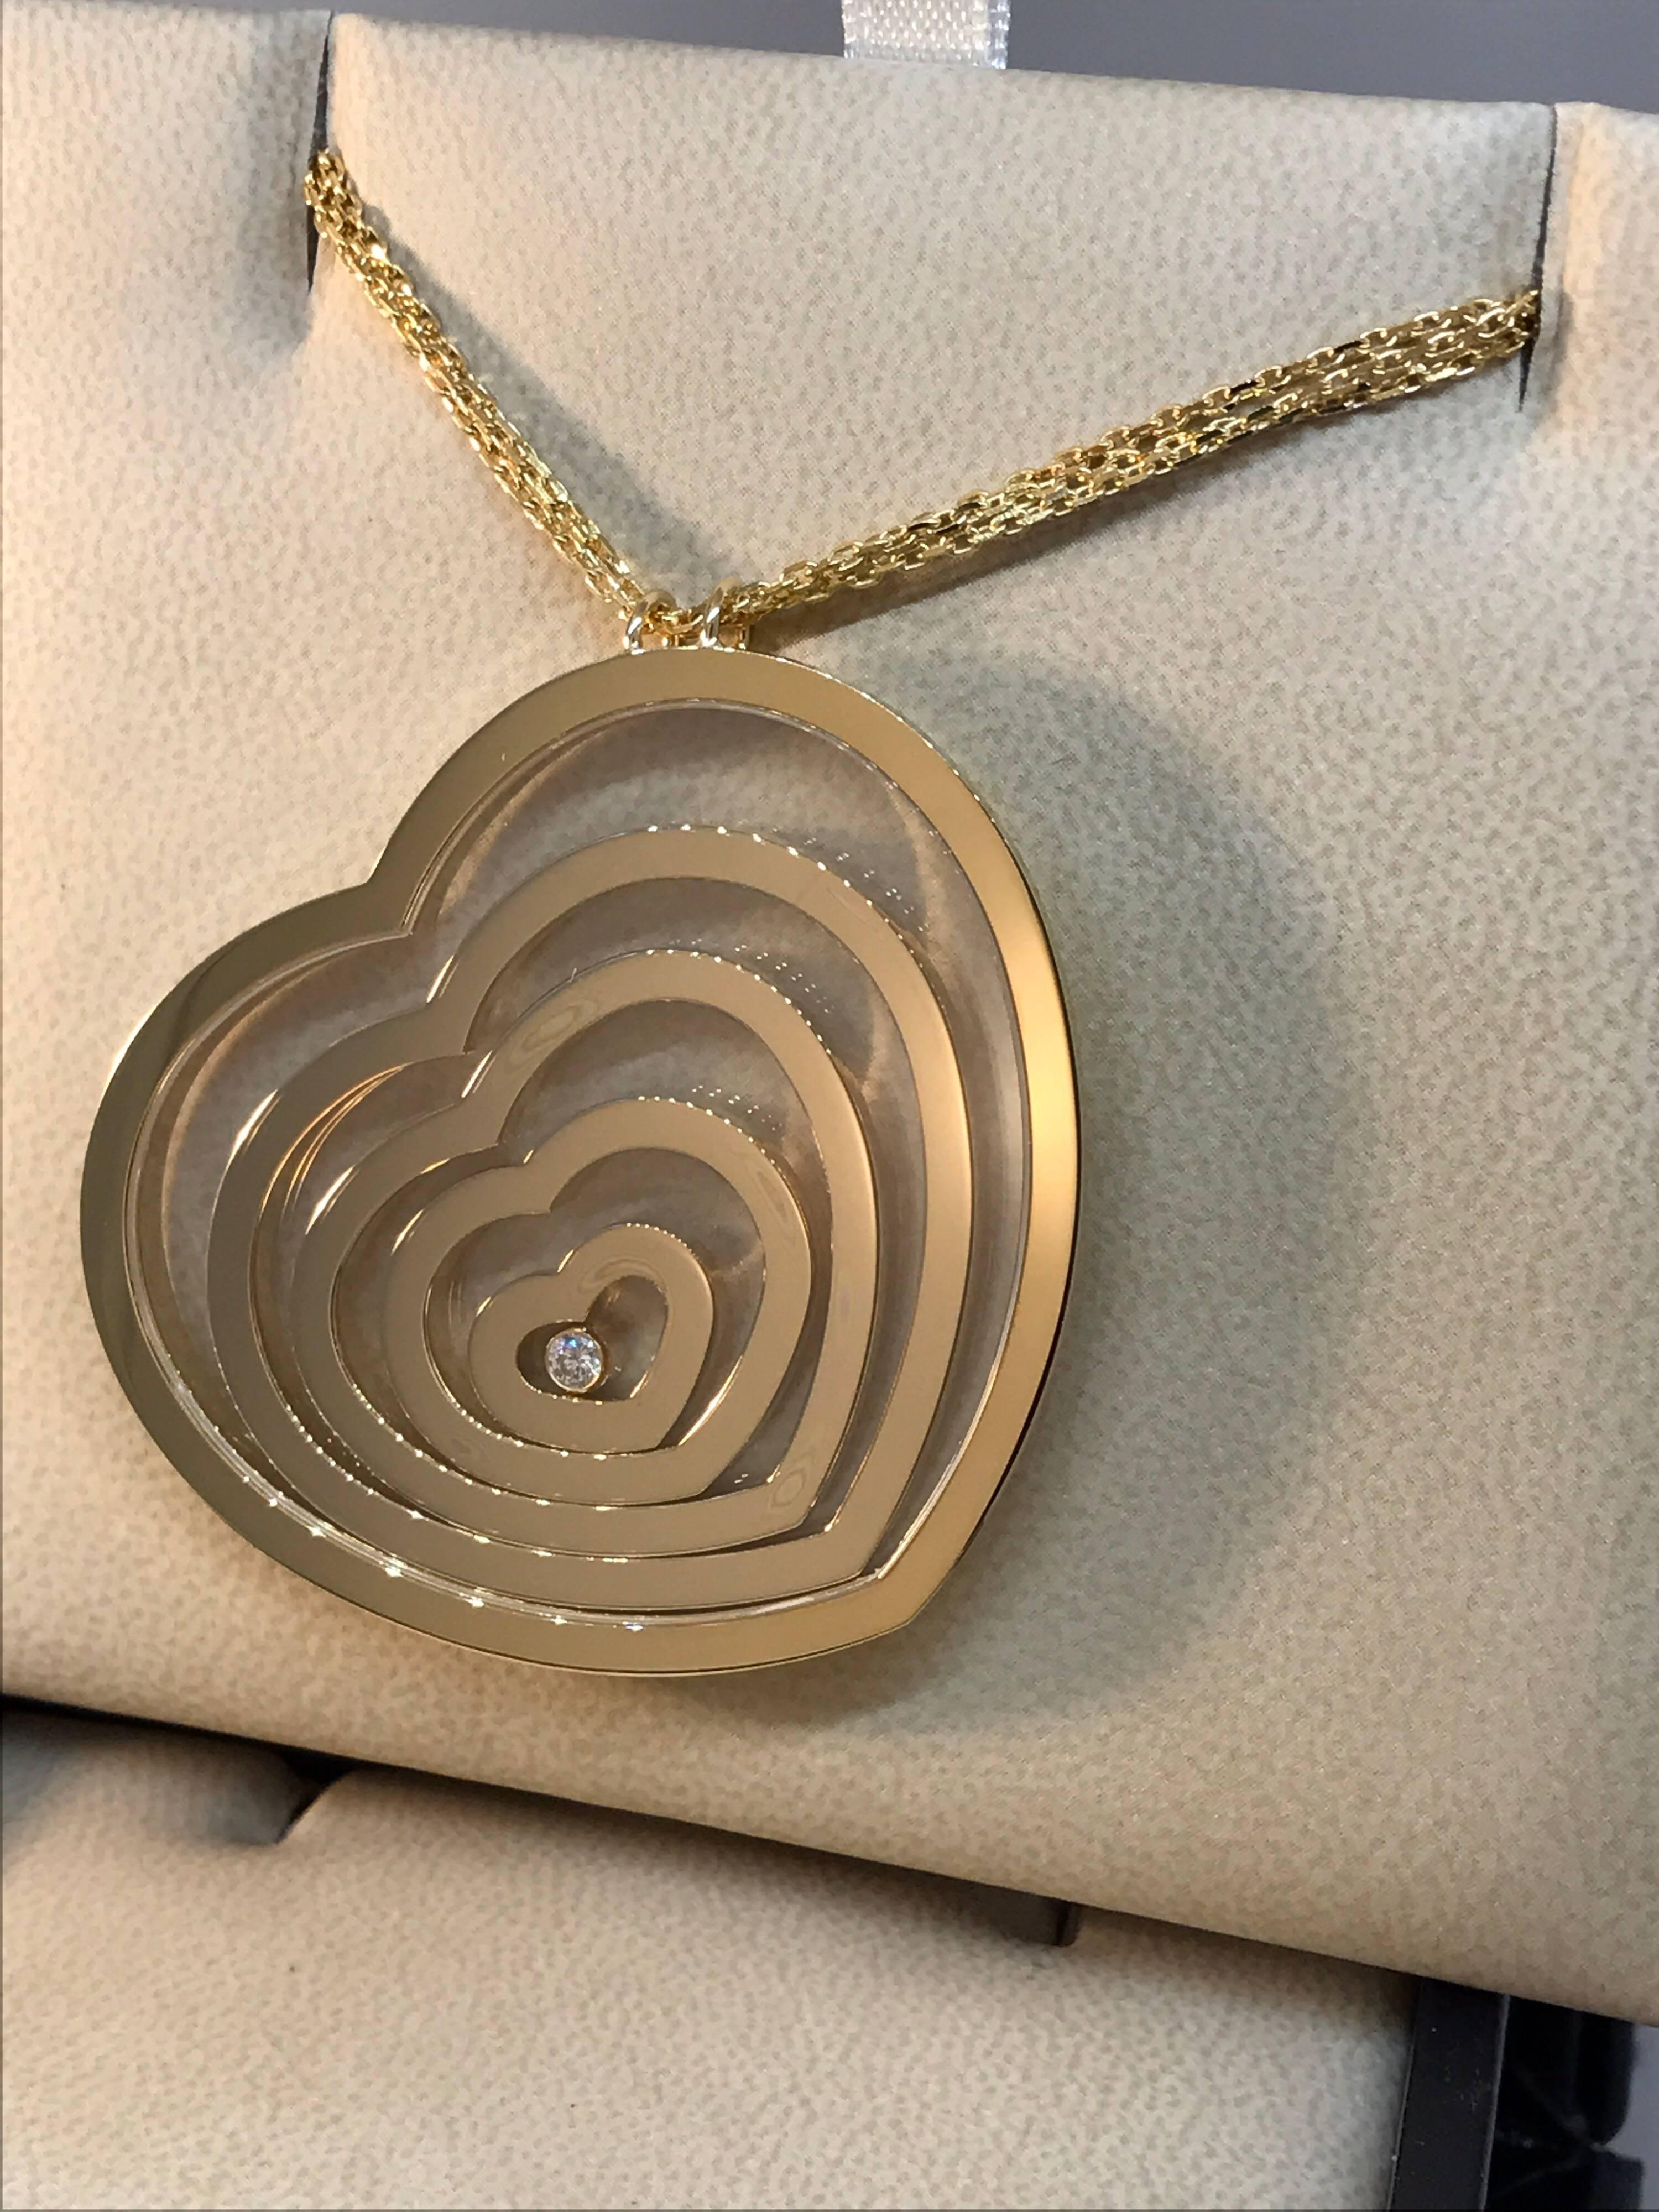 Chopard Happy Spirit Large Heart Pendant / Necklace

Model Number: 79/5866-0001

100% Authentic

Brand New

Comes with original Chopard box, certificate of authenticity and warranty, and jewels manual

18 Karat Yellow Gold 

Necklace weight